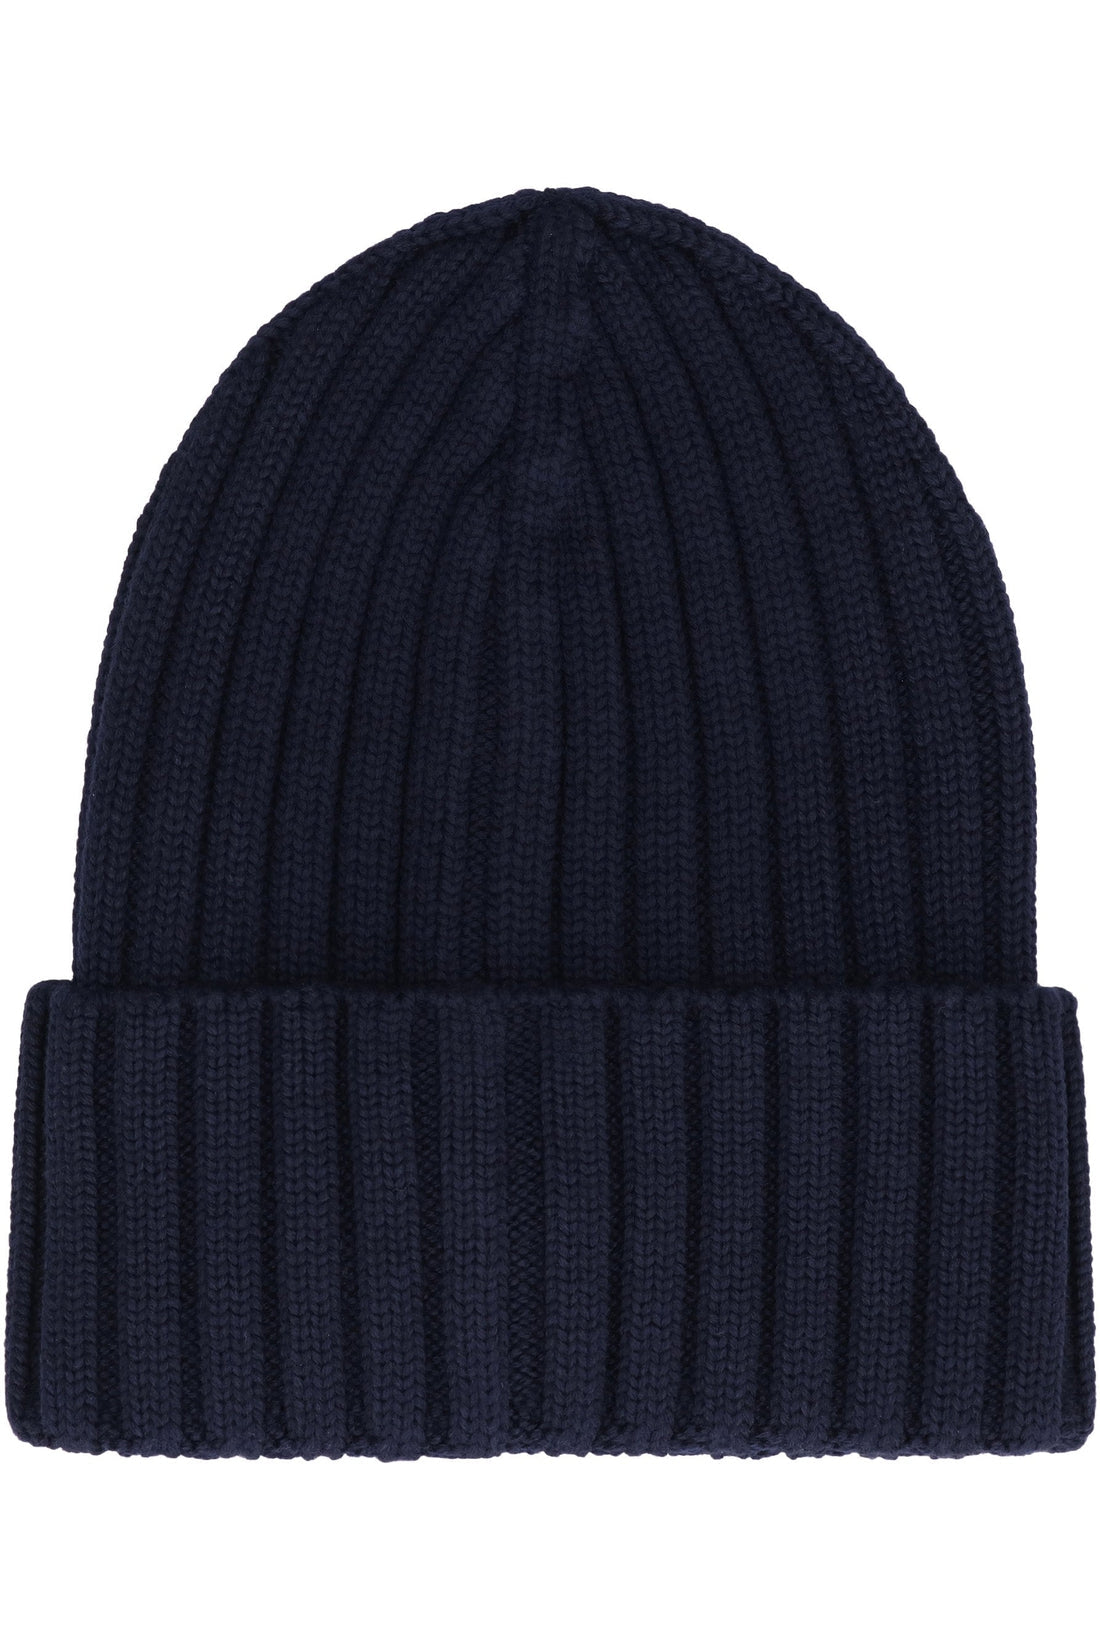 Moncler Grenoble-OUTLET-SALE-Knitted wool beanie hat-ARCHIVIST